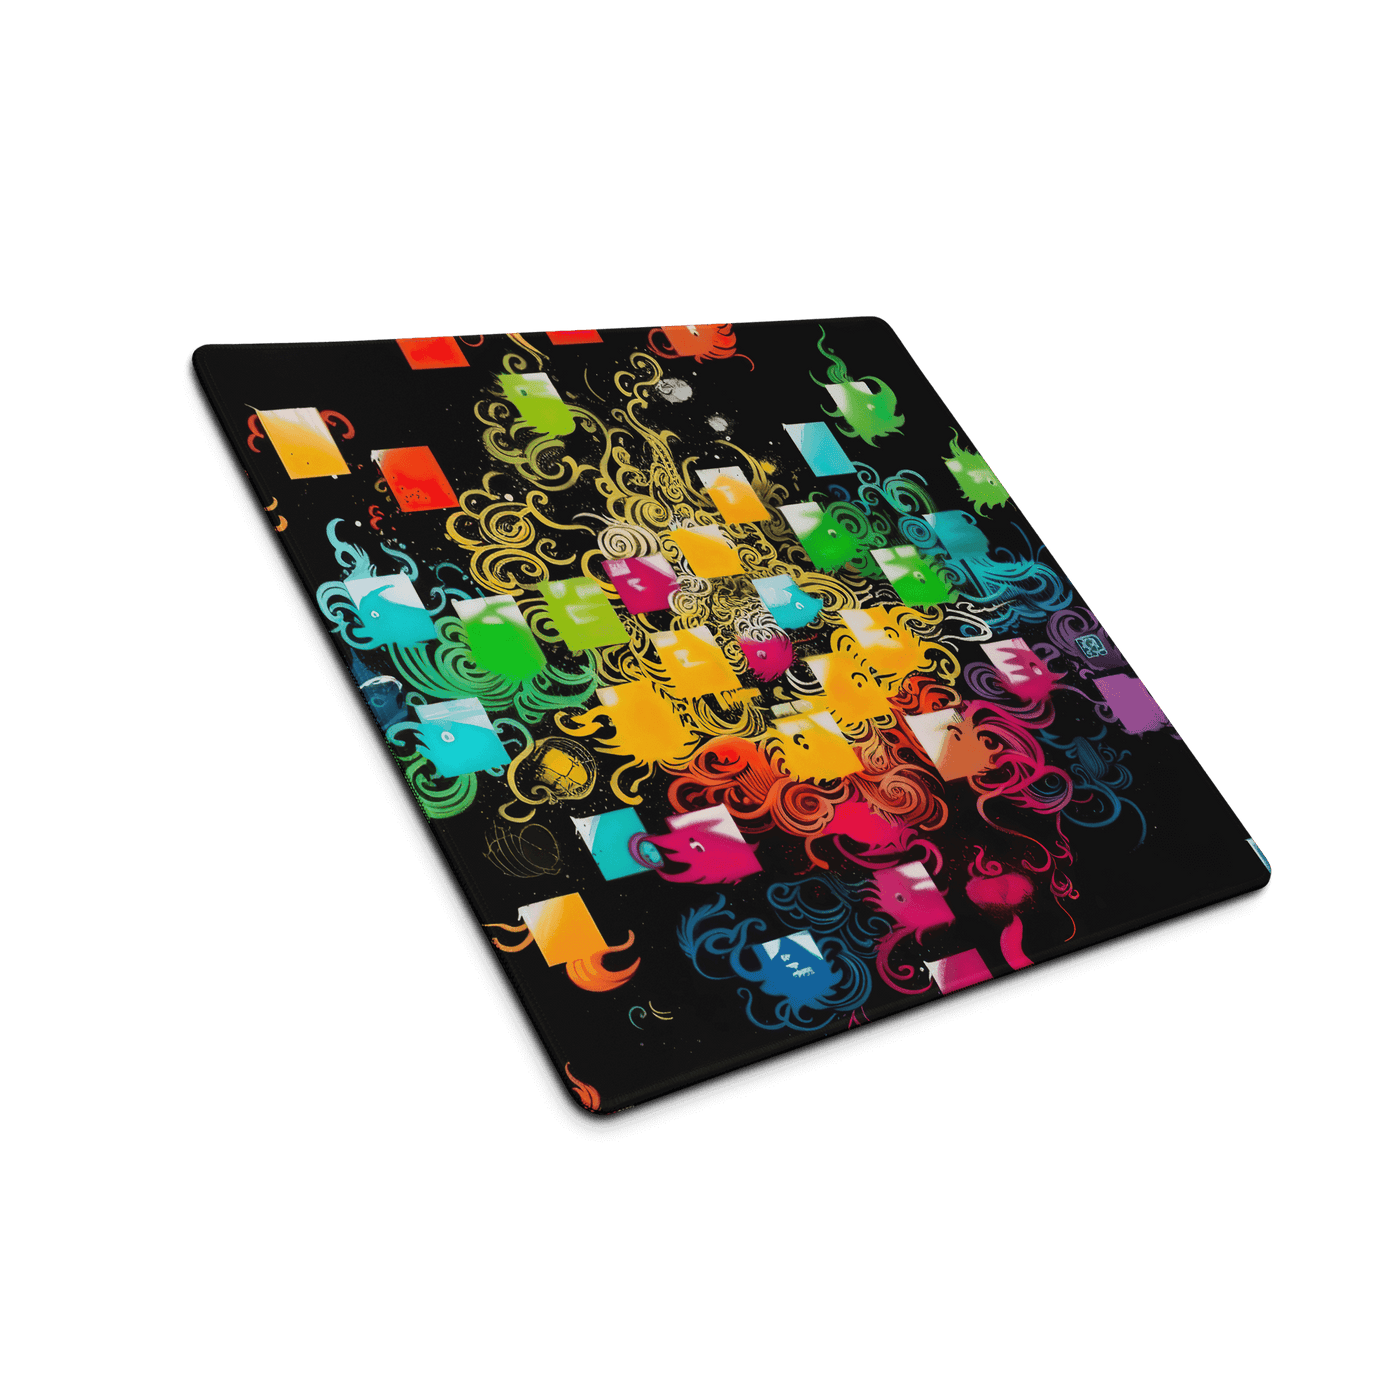 Premium Gaming Mouse Pad | Colorful Squares & Shapes